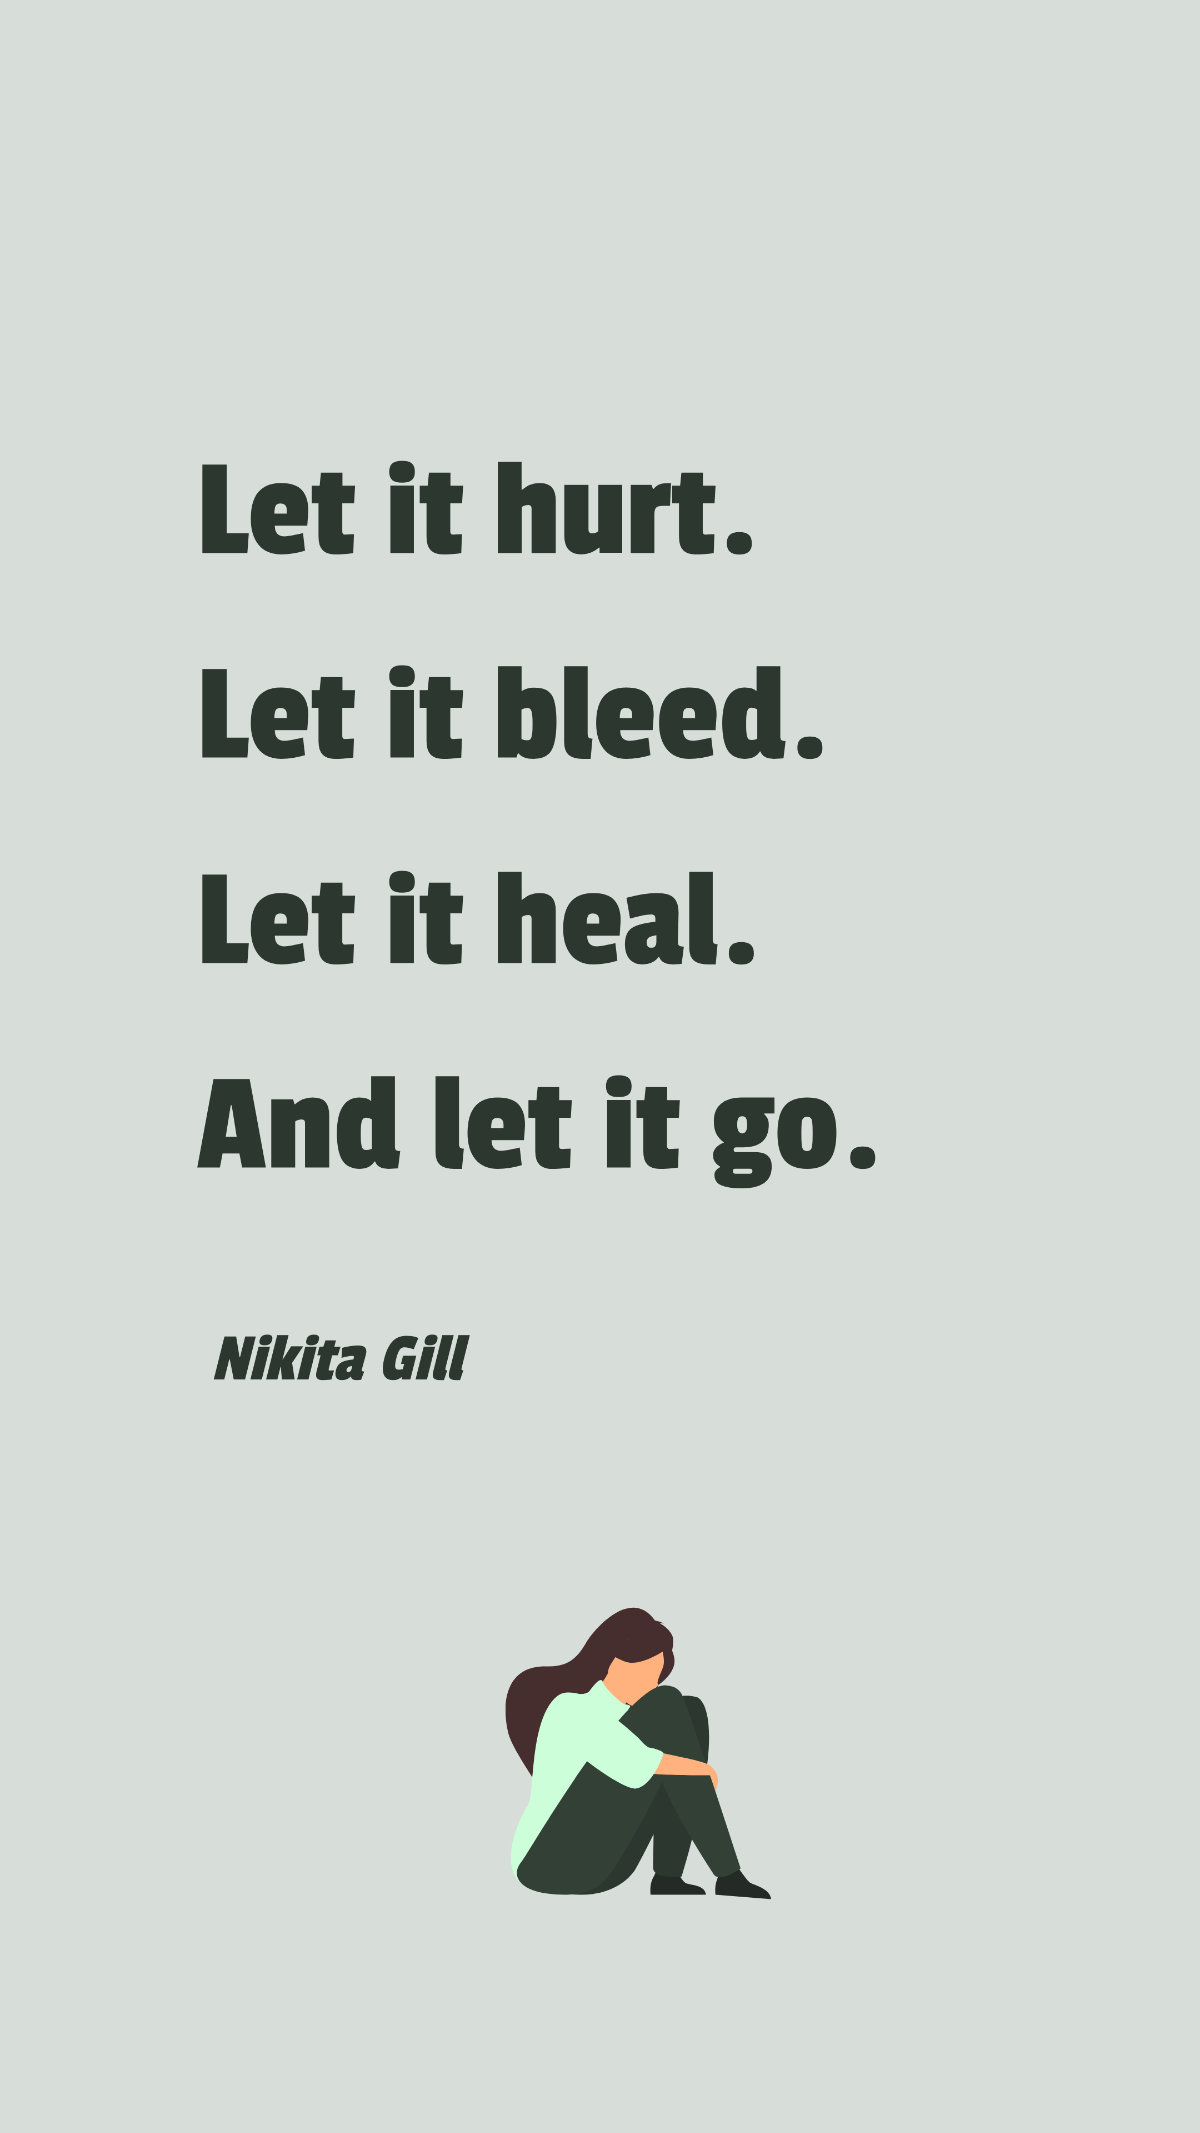 Free Nikita Gill - Let it hurt. Let it bleed. Let it heal. And let it go. Template